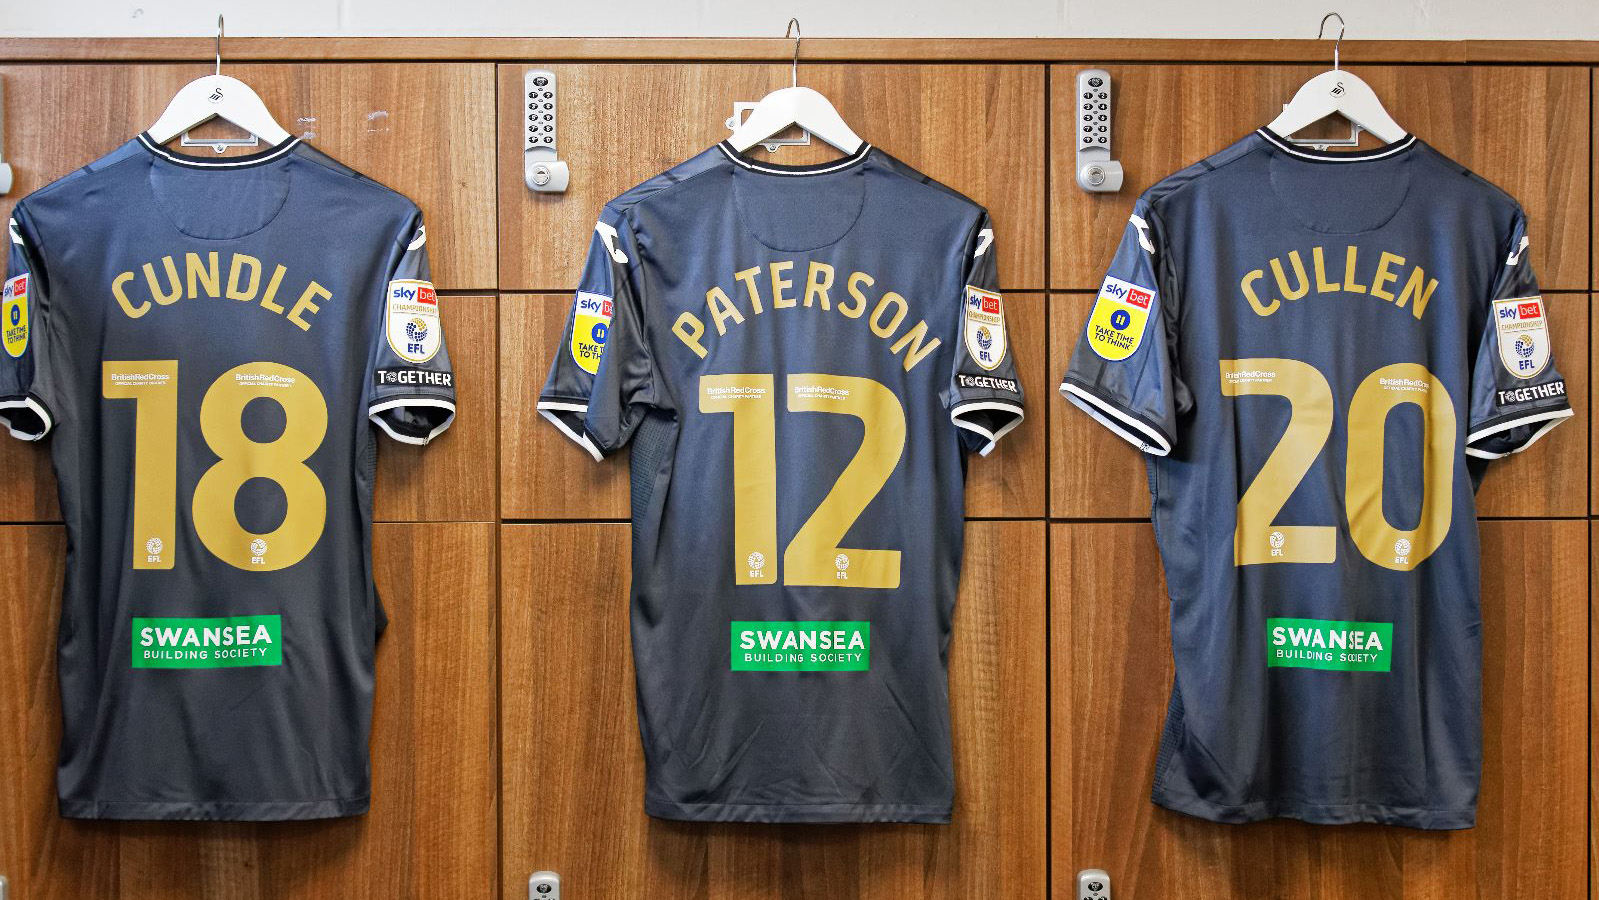 Cundle, Paterson and Cullen shirts in the changing room at Carrow Road